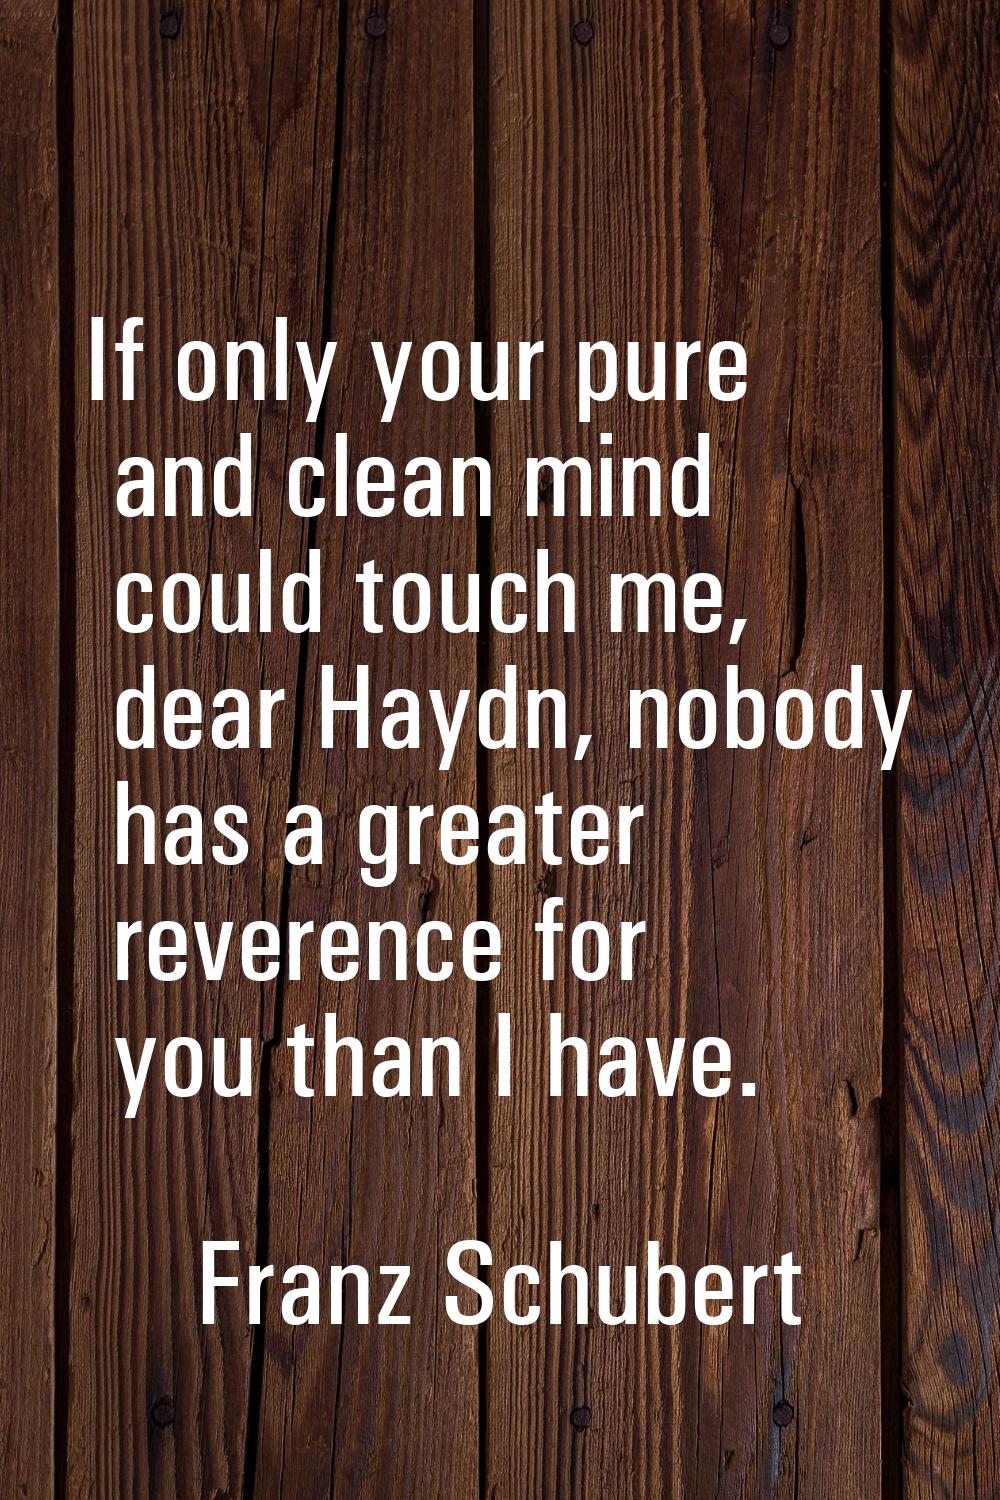 If only your pure and clean mind could touch me, dear Haydn, nobody has a greater reverence for you